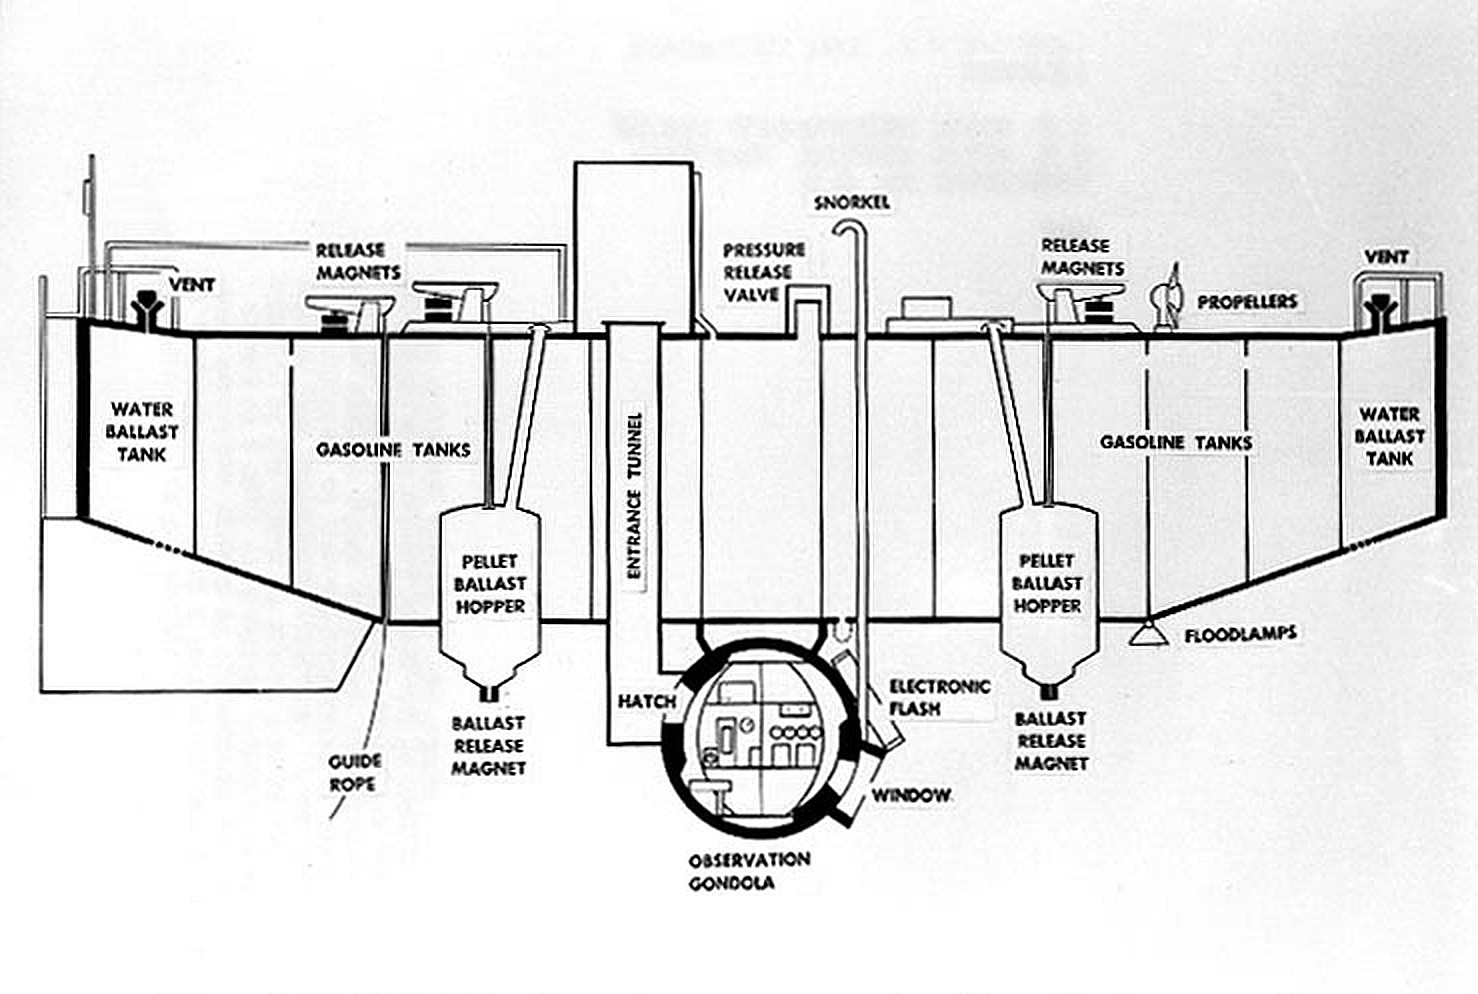 Redrawing of U.S. Naval Historical Center Photograph NH 96807, General arrangement drawing of the bathyscaphe USS Trieste, circa 1959 Redrawn using Adobe Illustrator by drawing over the image to reproduce the line drawing. Some areas were unclear in the photo, so reasonable interpolations were made. In addition some text labels were repositioned. Added opaque background.